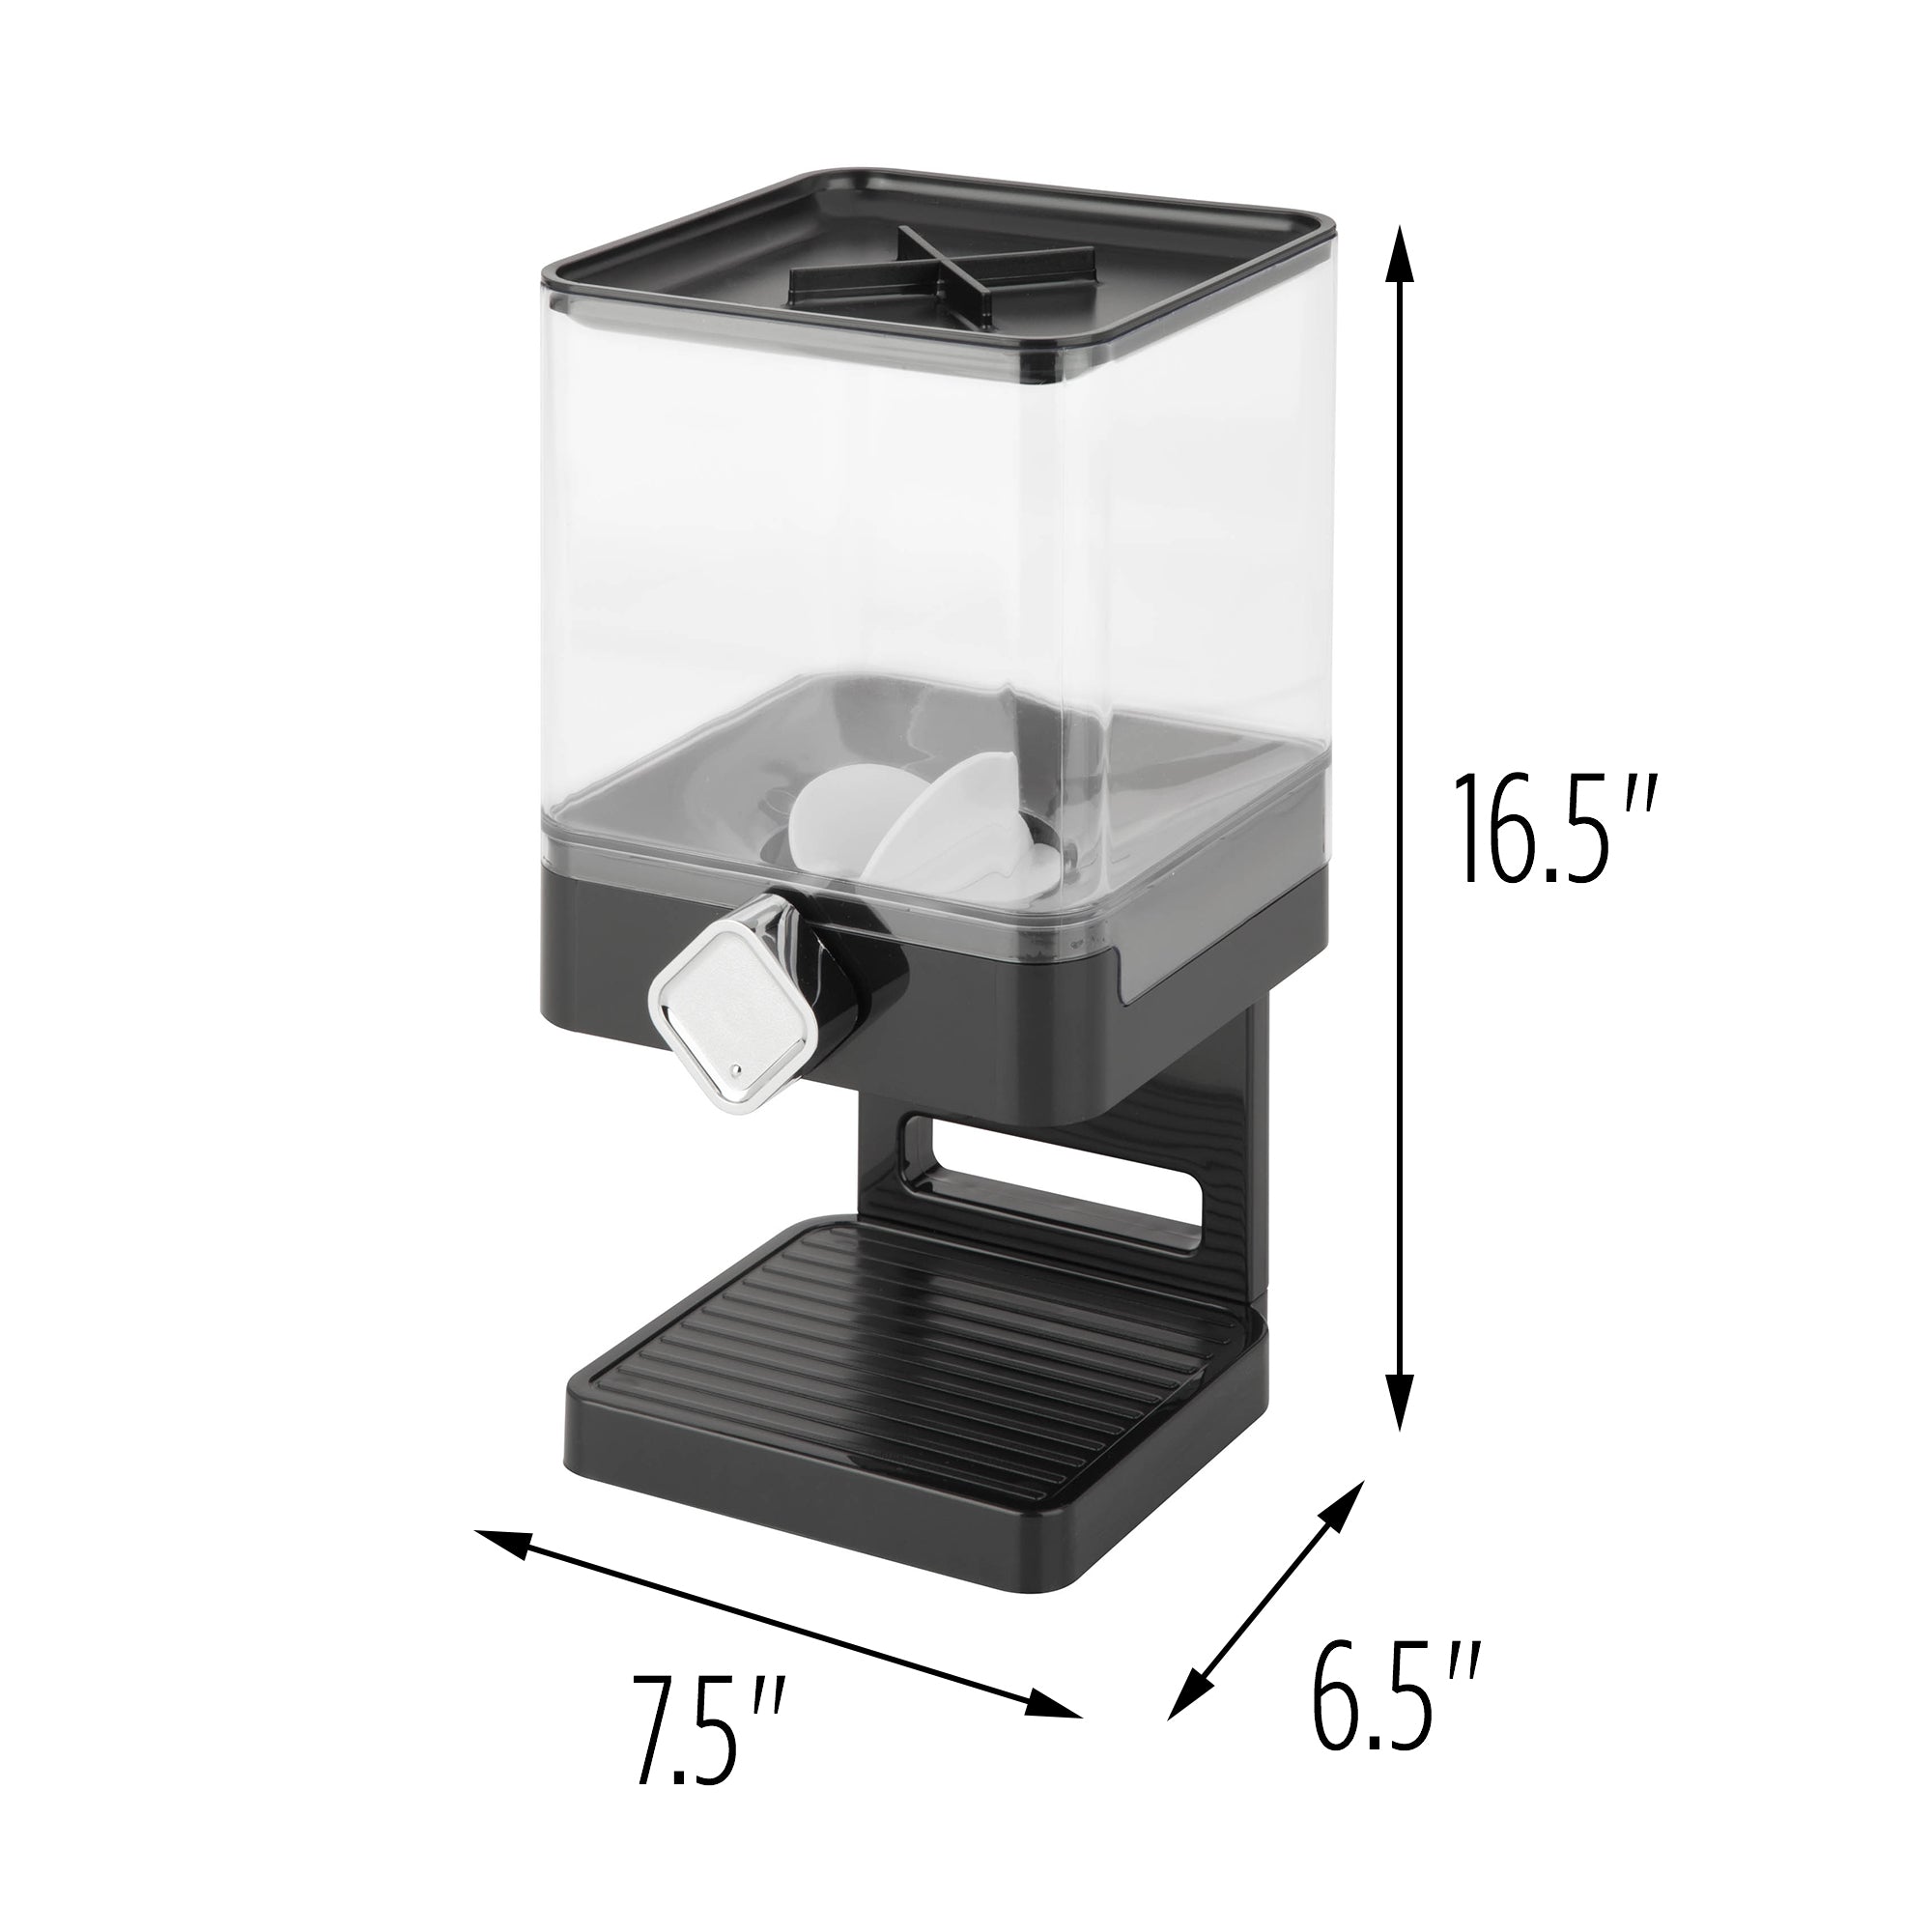 Honey-Can-Do Double Black Cereal Dispenser with Portion Control KCH-06121 -  The Home Depot